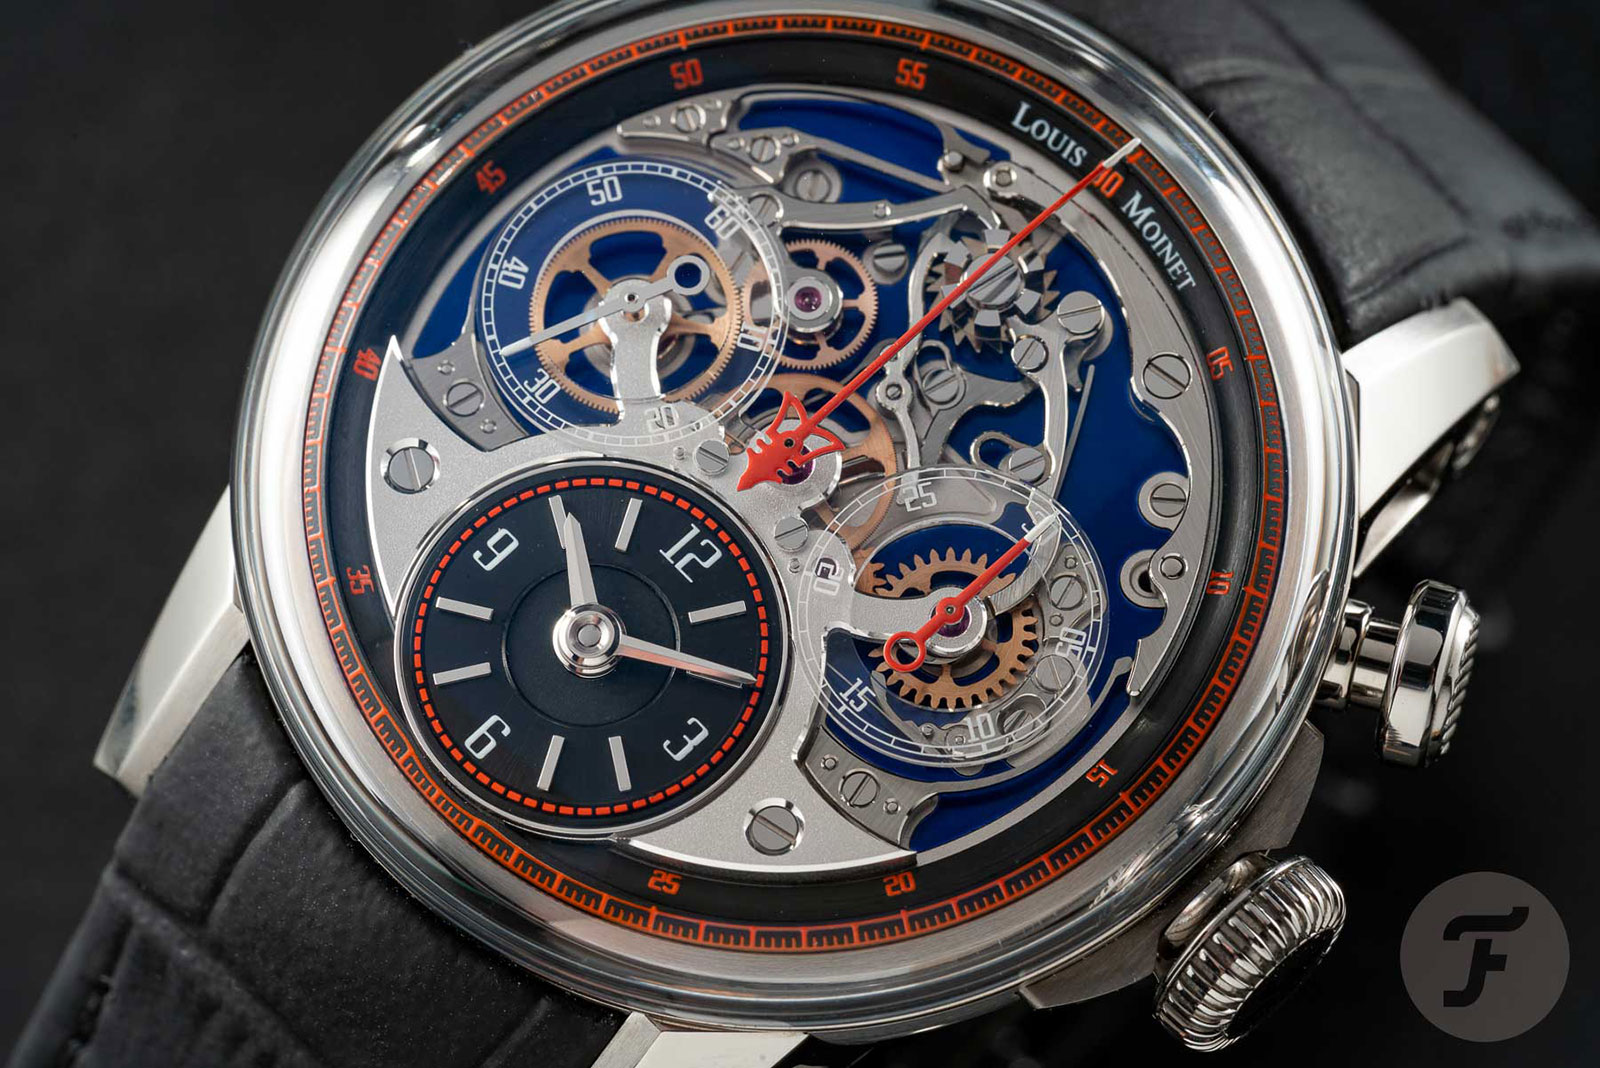 Hands-On with the Louis Moinet Memoris 200th Anniversary